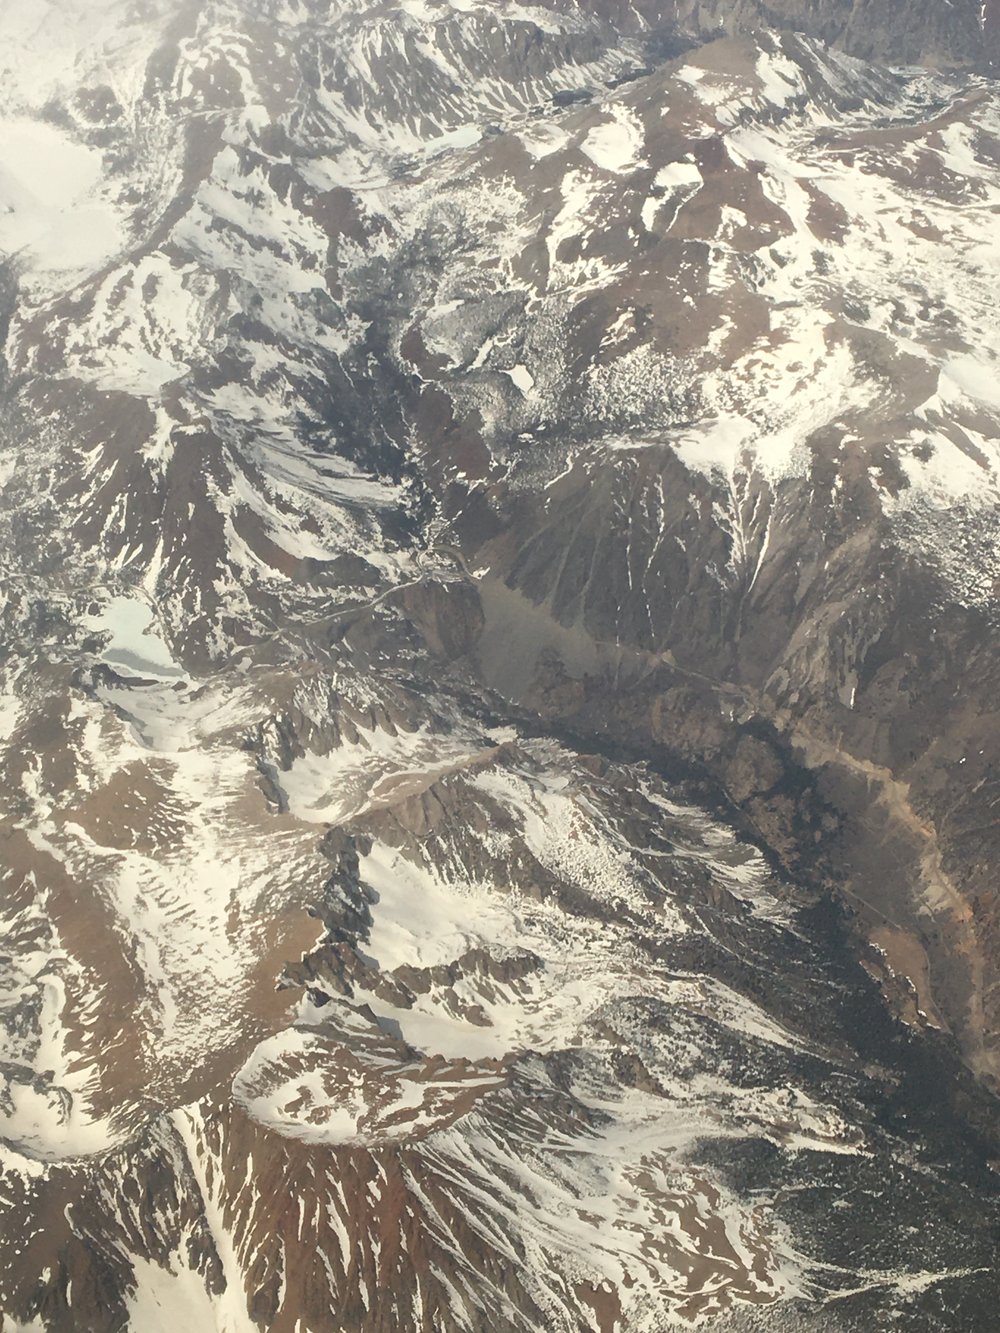 Tioga Pass from above